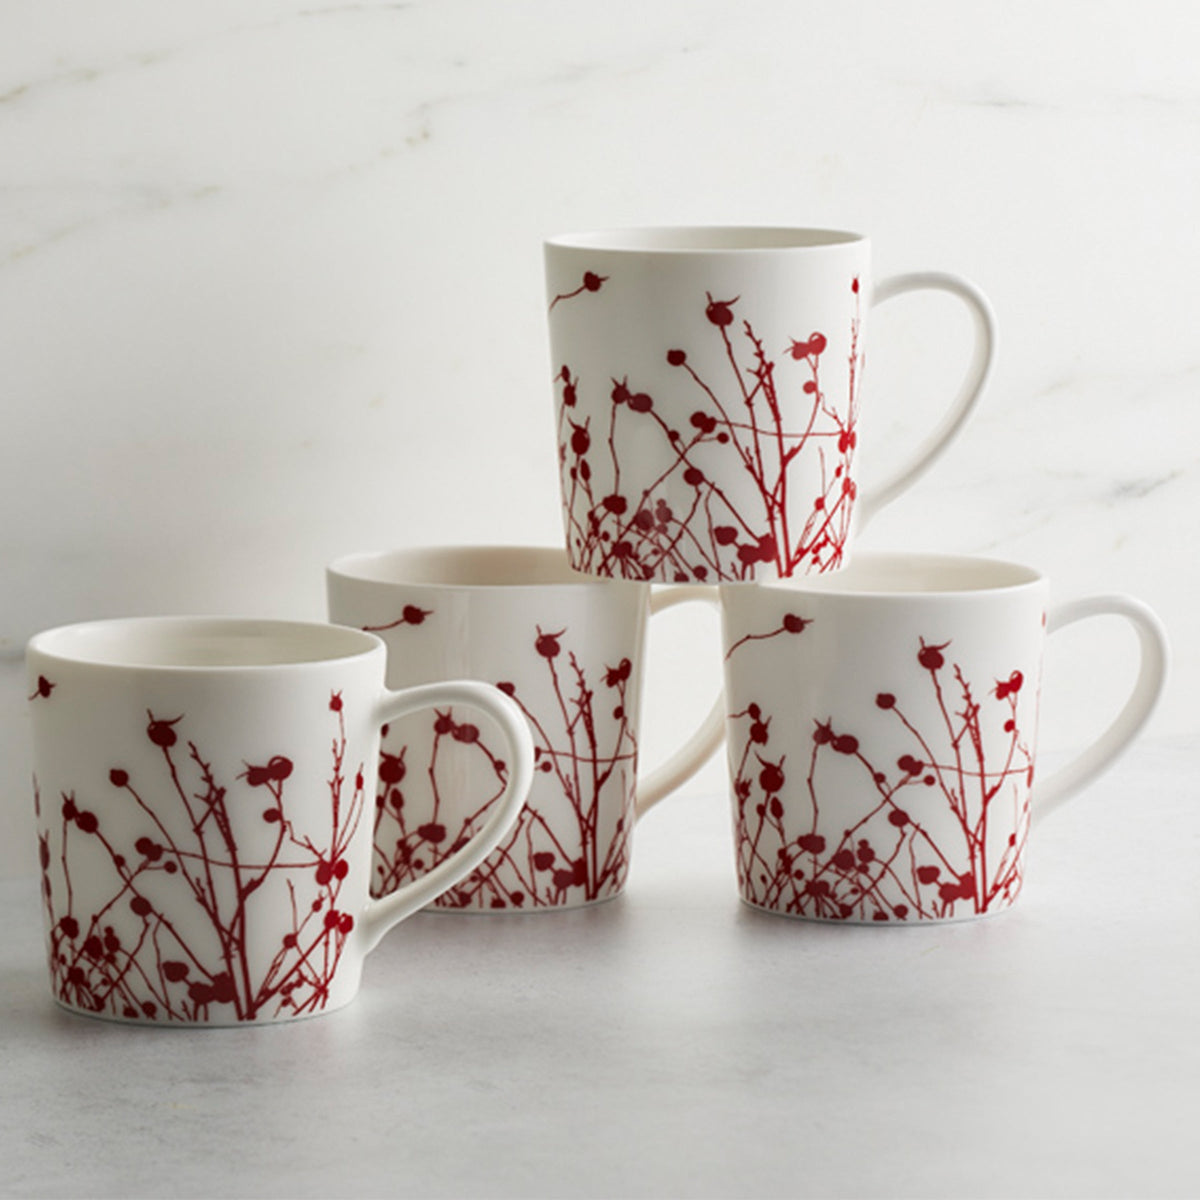 Four Winterberries Mugs Crimson by Caskata Artisanal Home with red flowers on them.